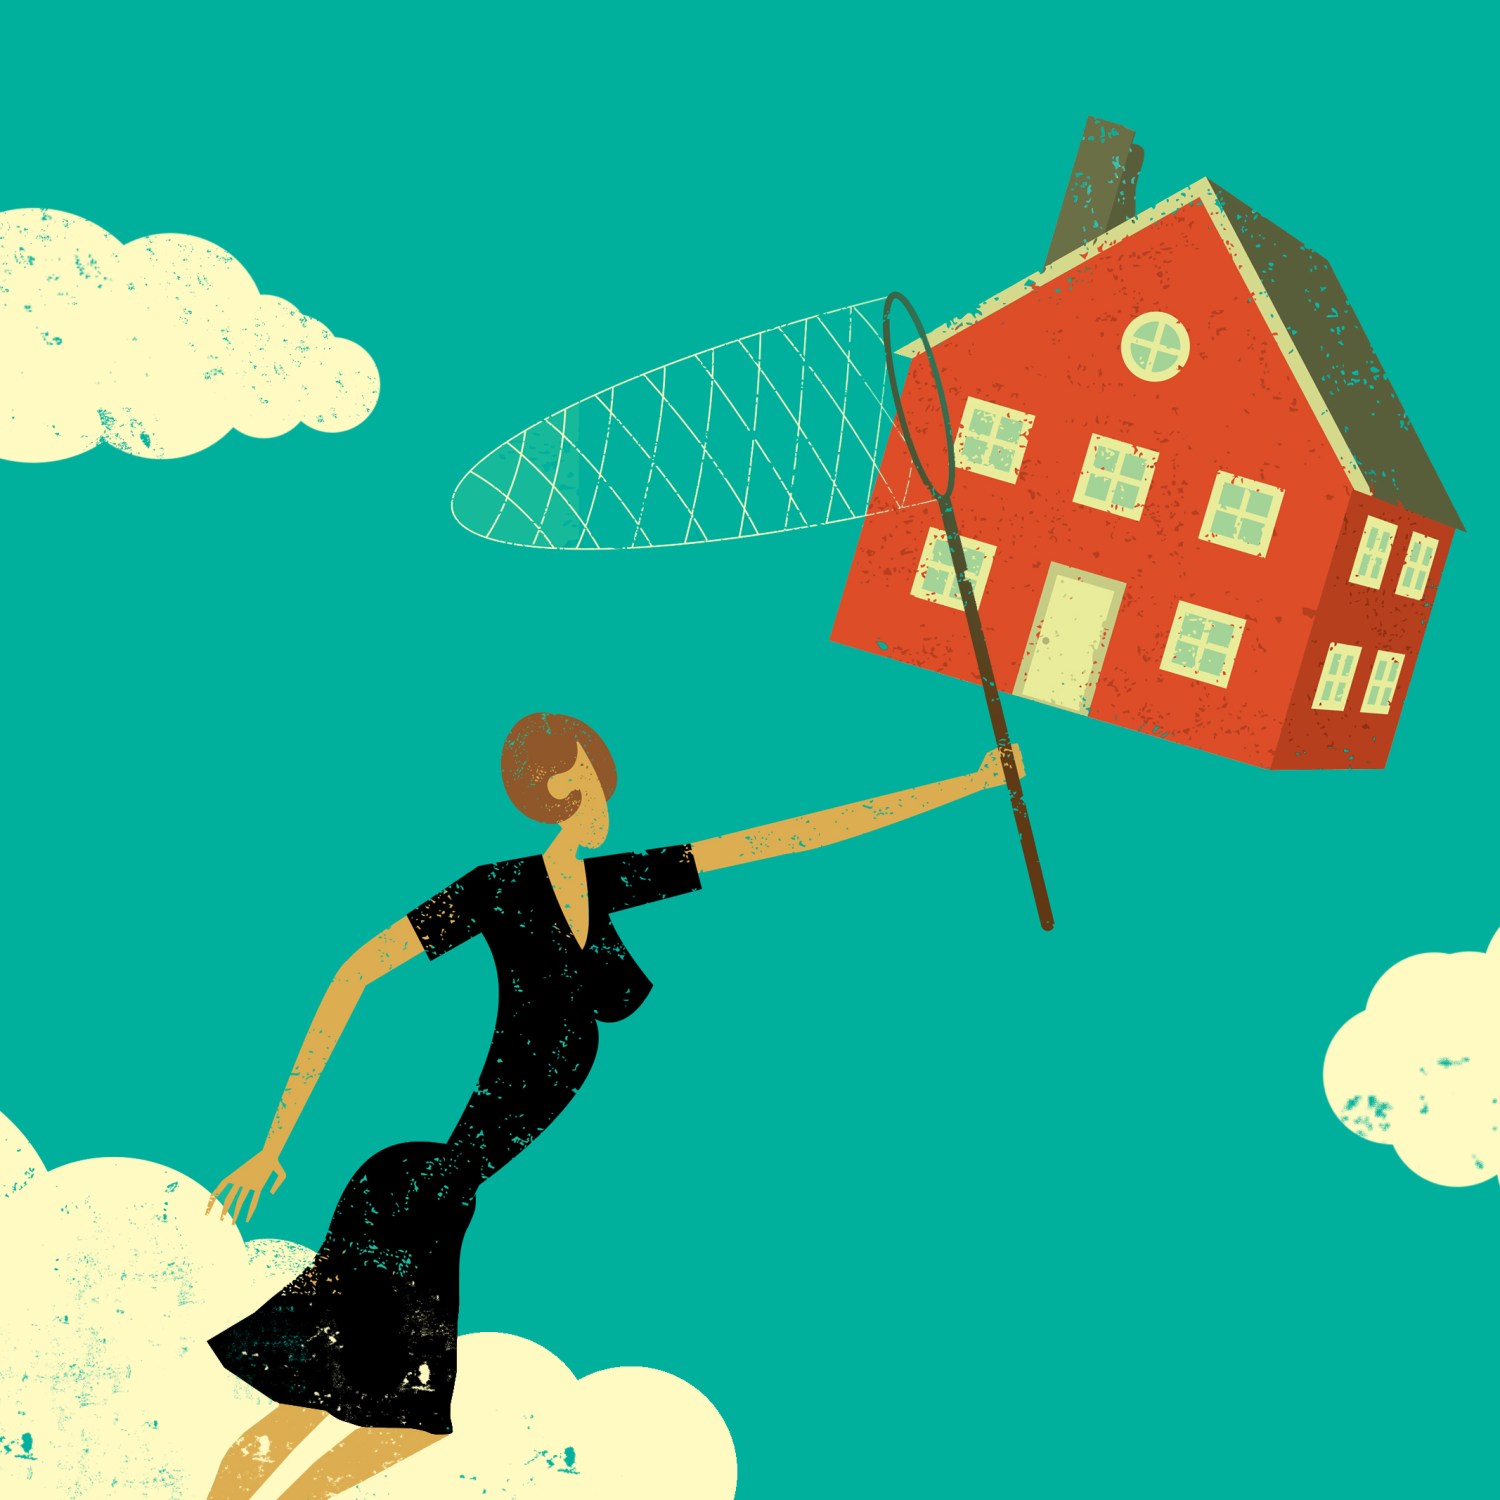 Illustration of woman chasing house with butterfly catcher